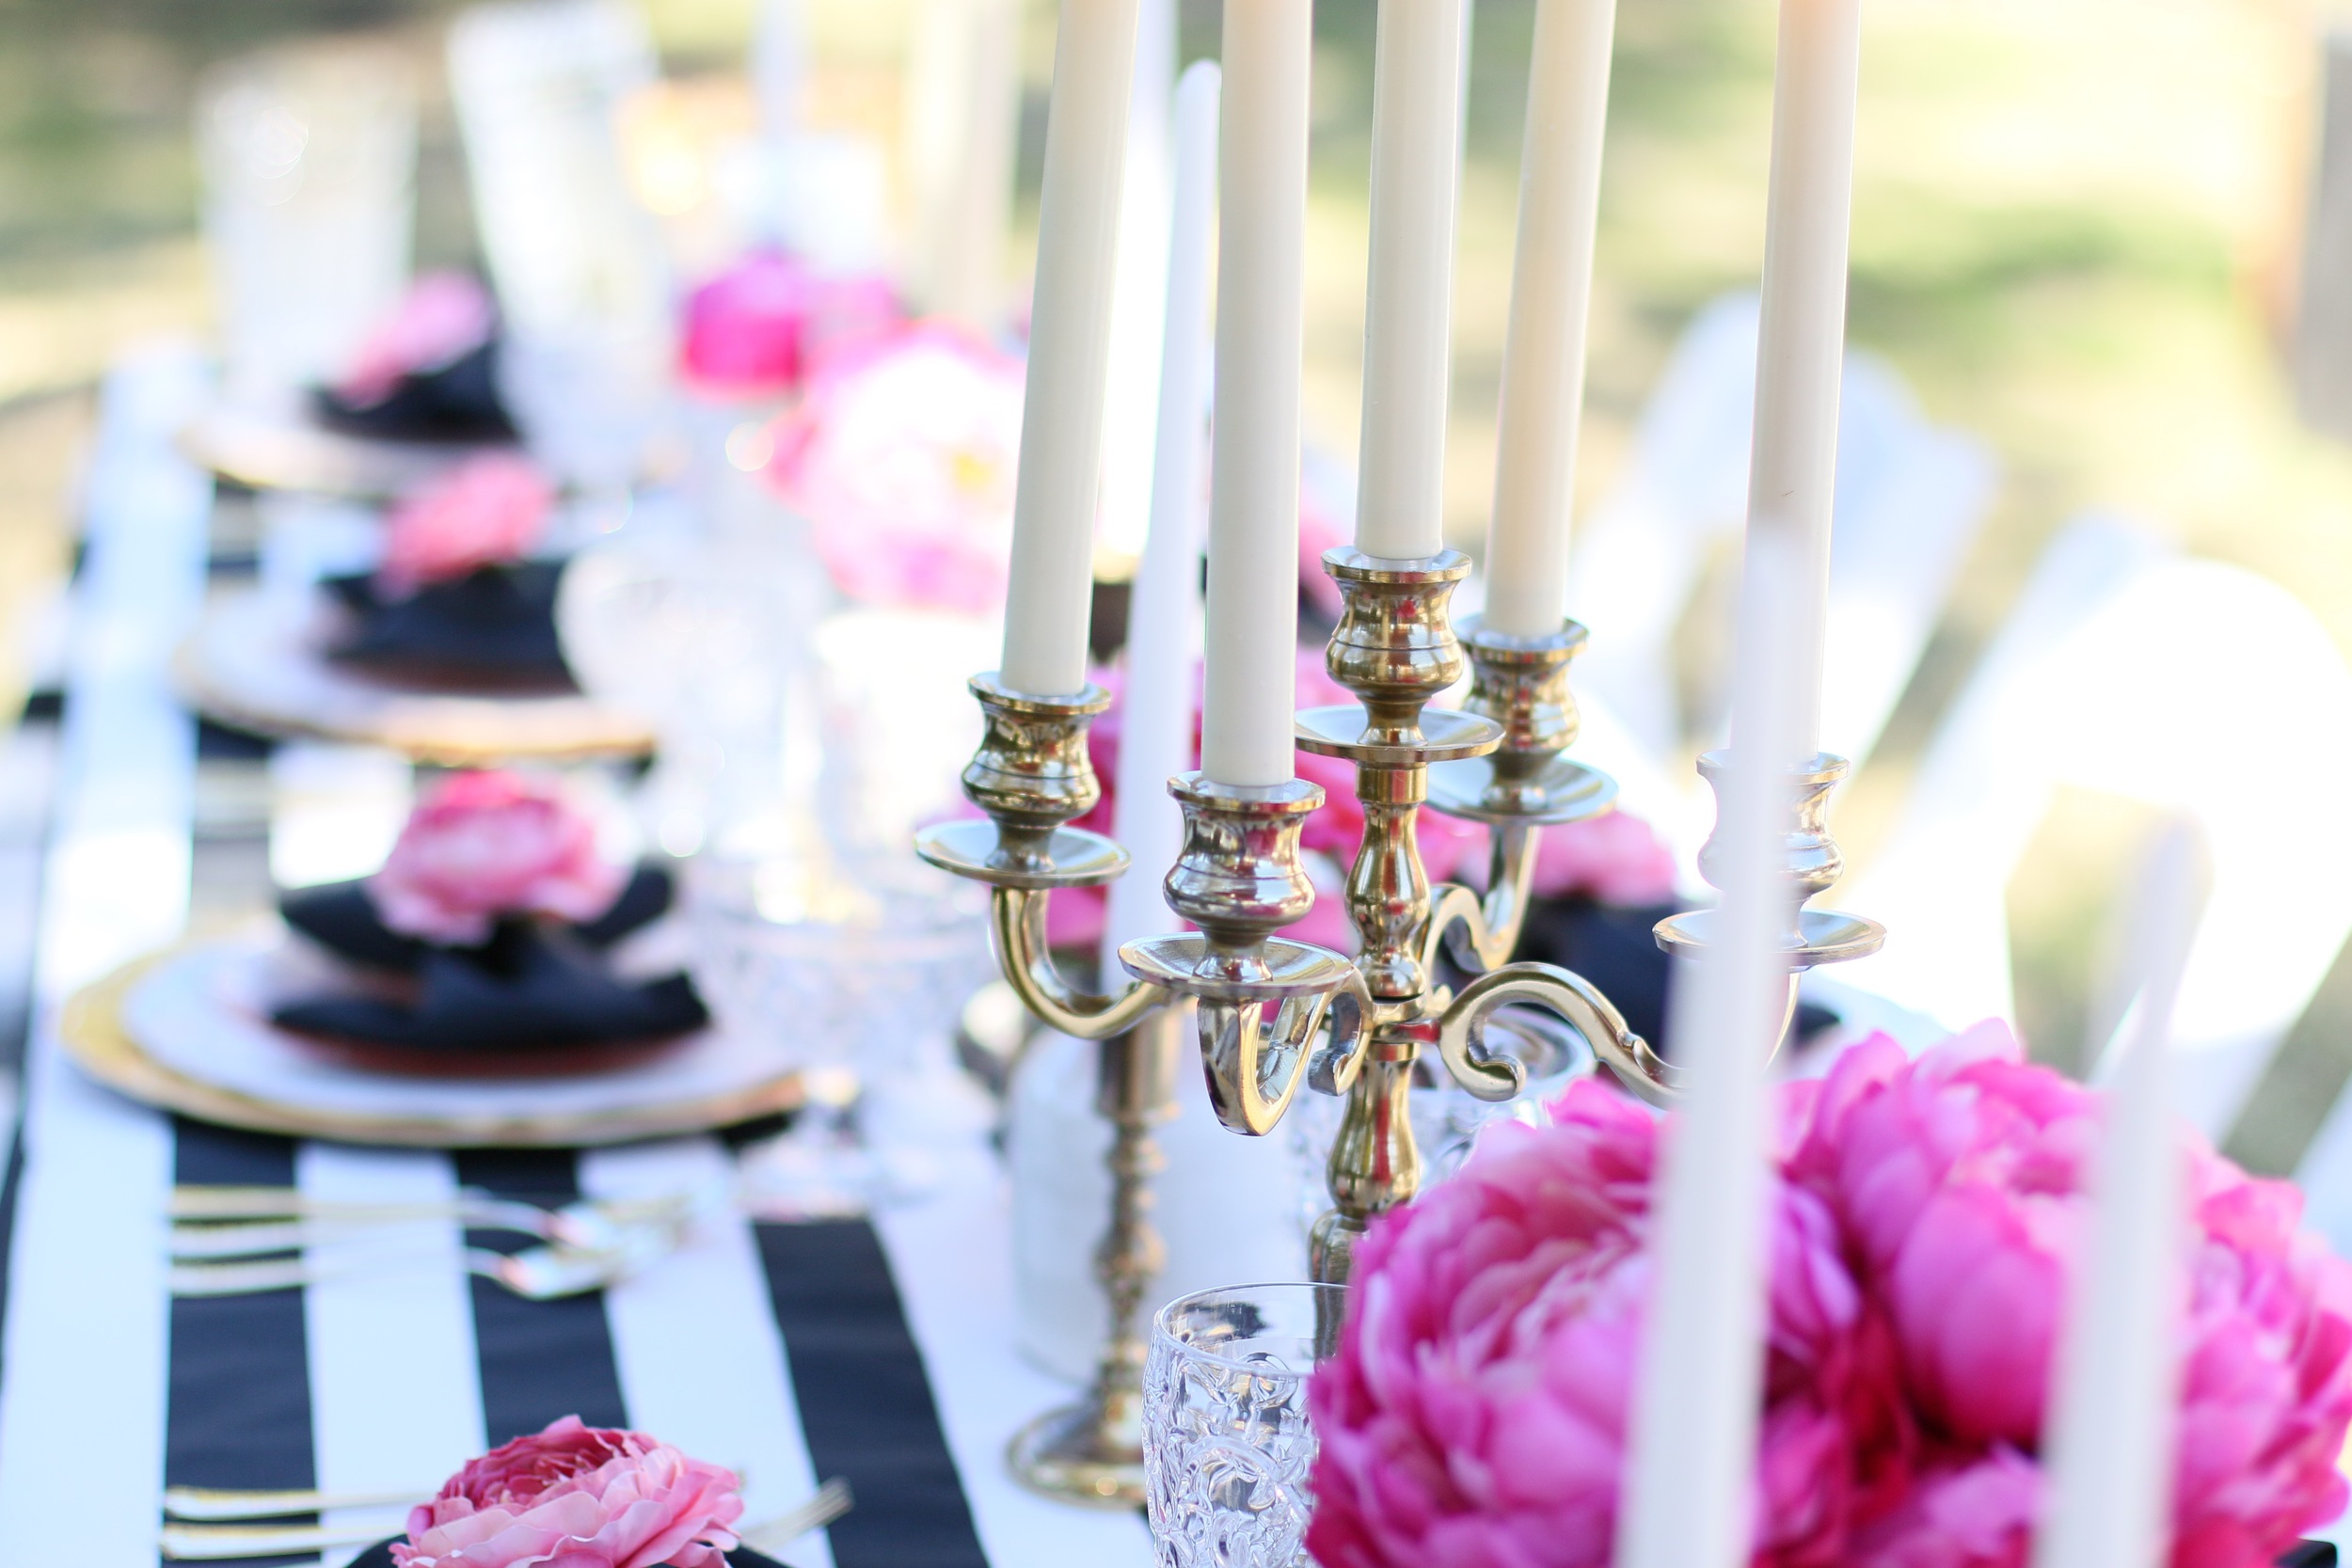 Copy of You'll want to find a reason to celebrate with our "Pink Please" Rental Collection! Everything here is prepackaged to rent! Black & White Stripes + Pink Peonies + gold accents = LOVE! @inJO...